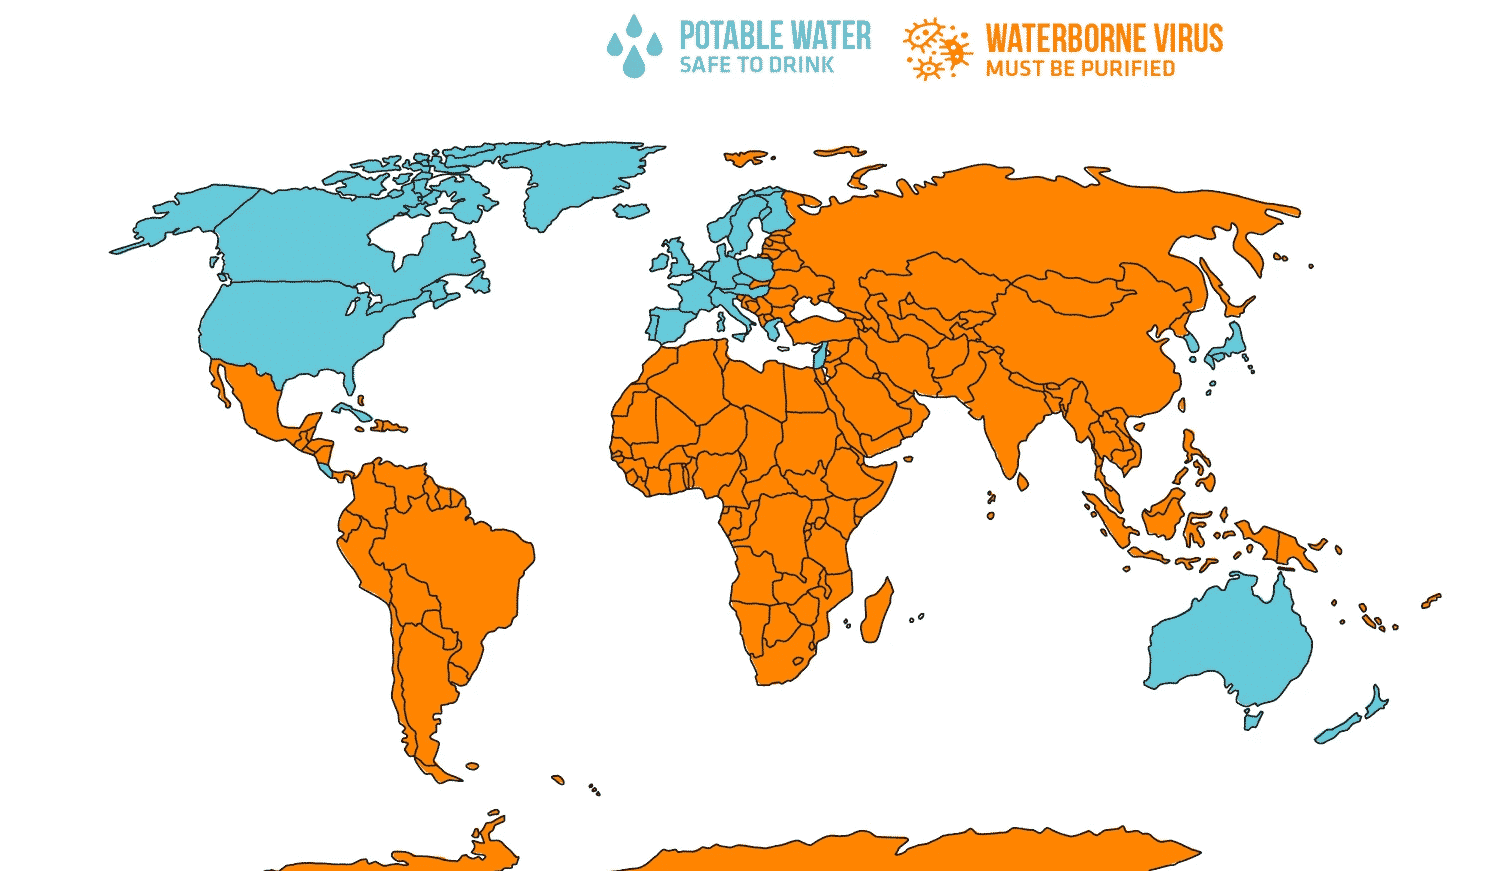 Countries without access to clean water